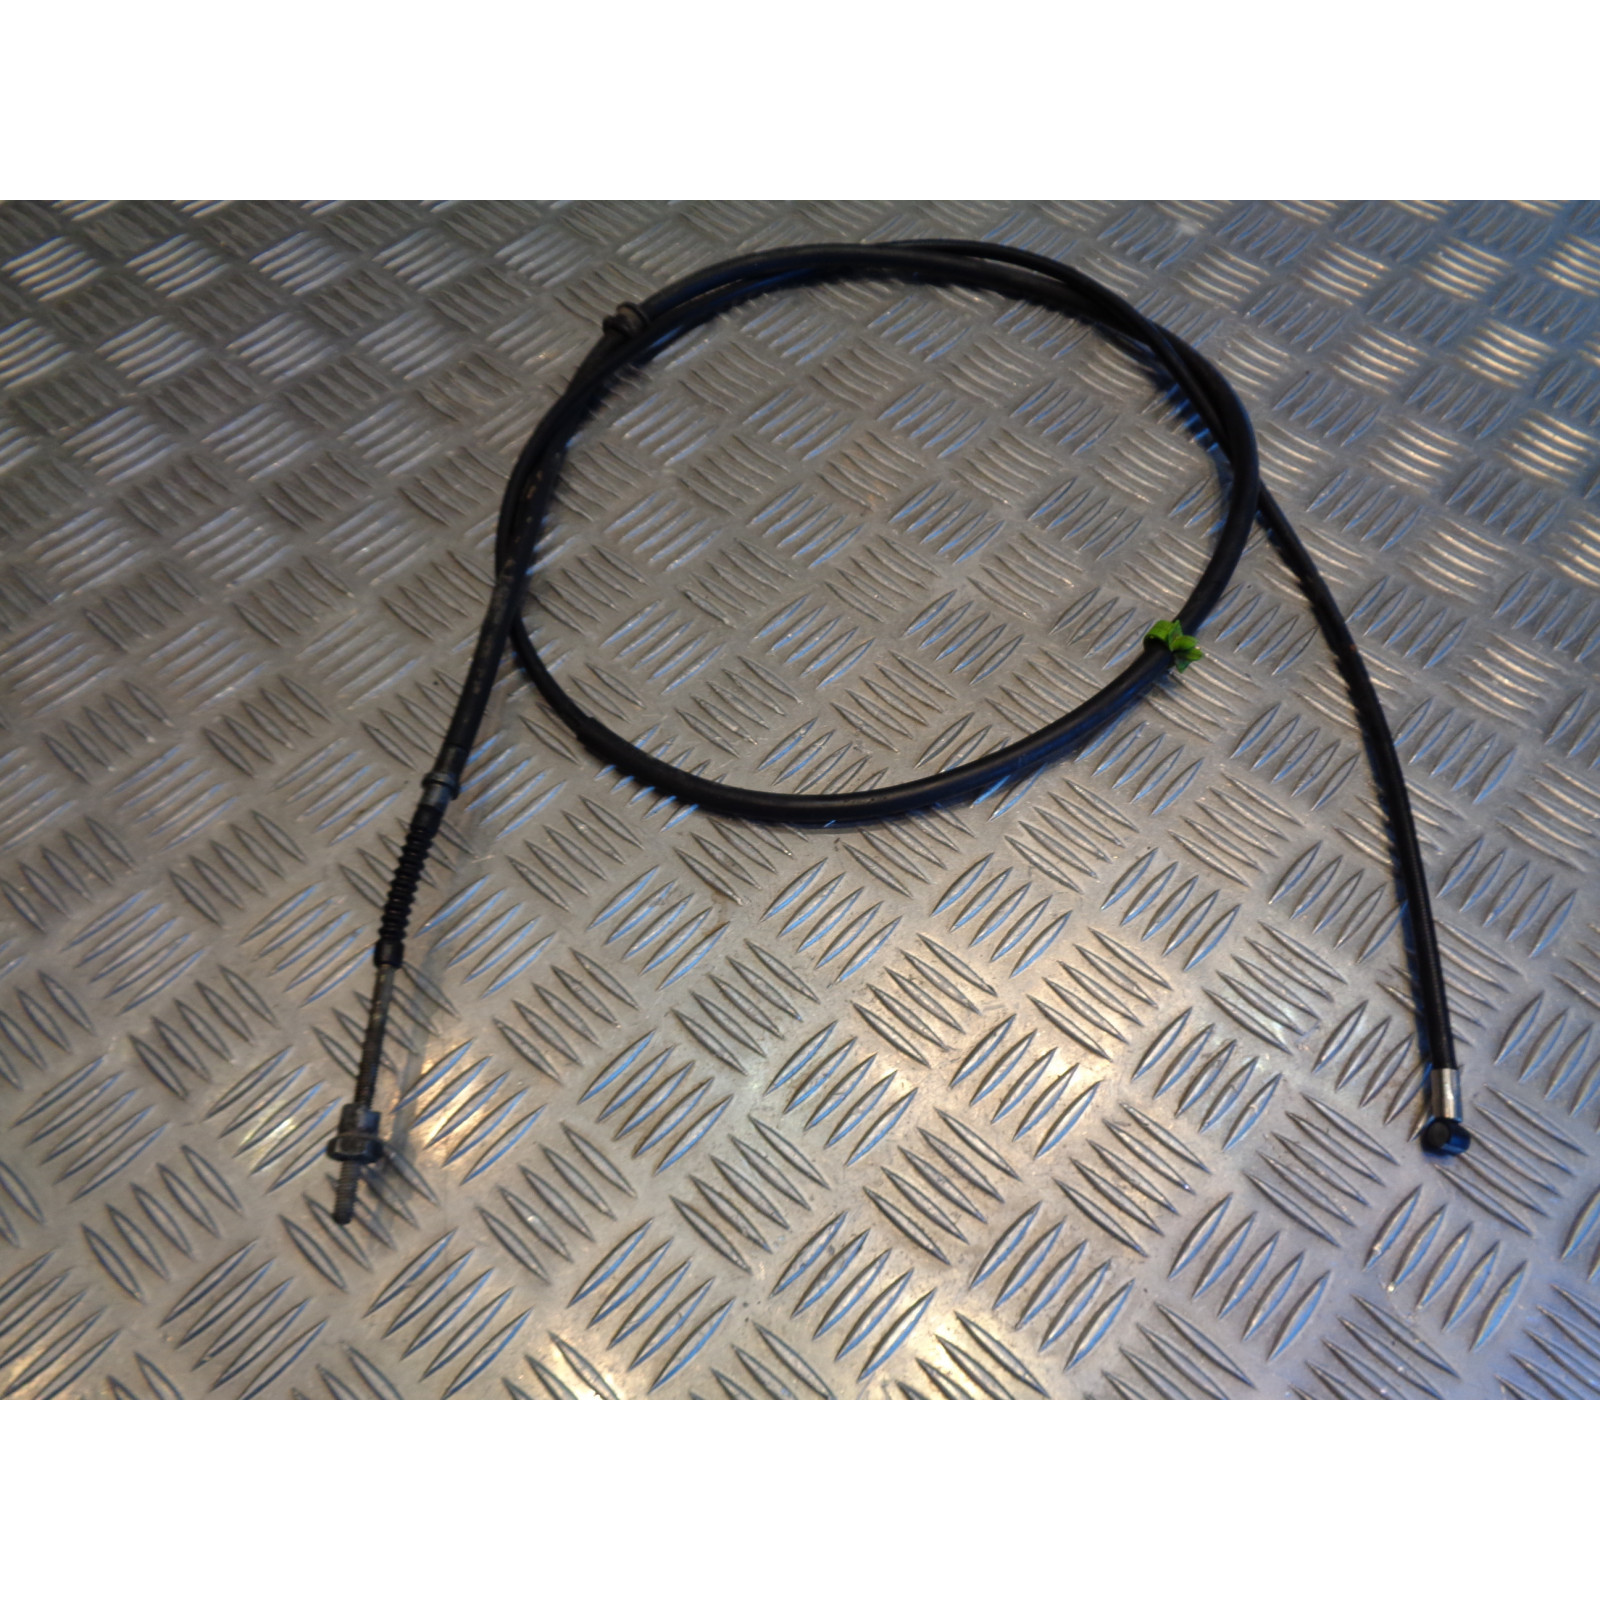 cable frein arriere scooter peugeot 50 vivacity 2 temps